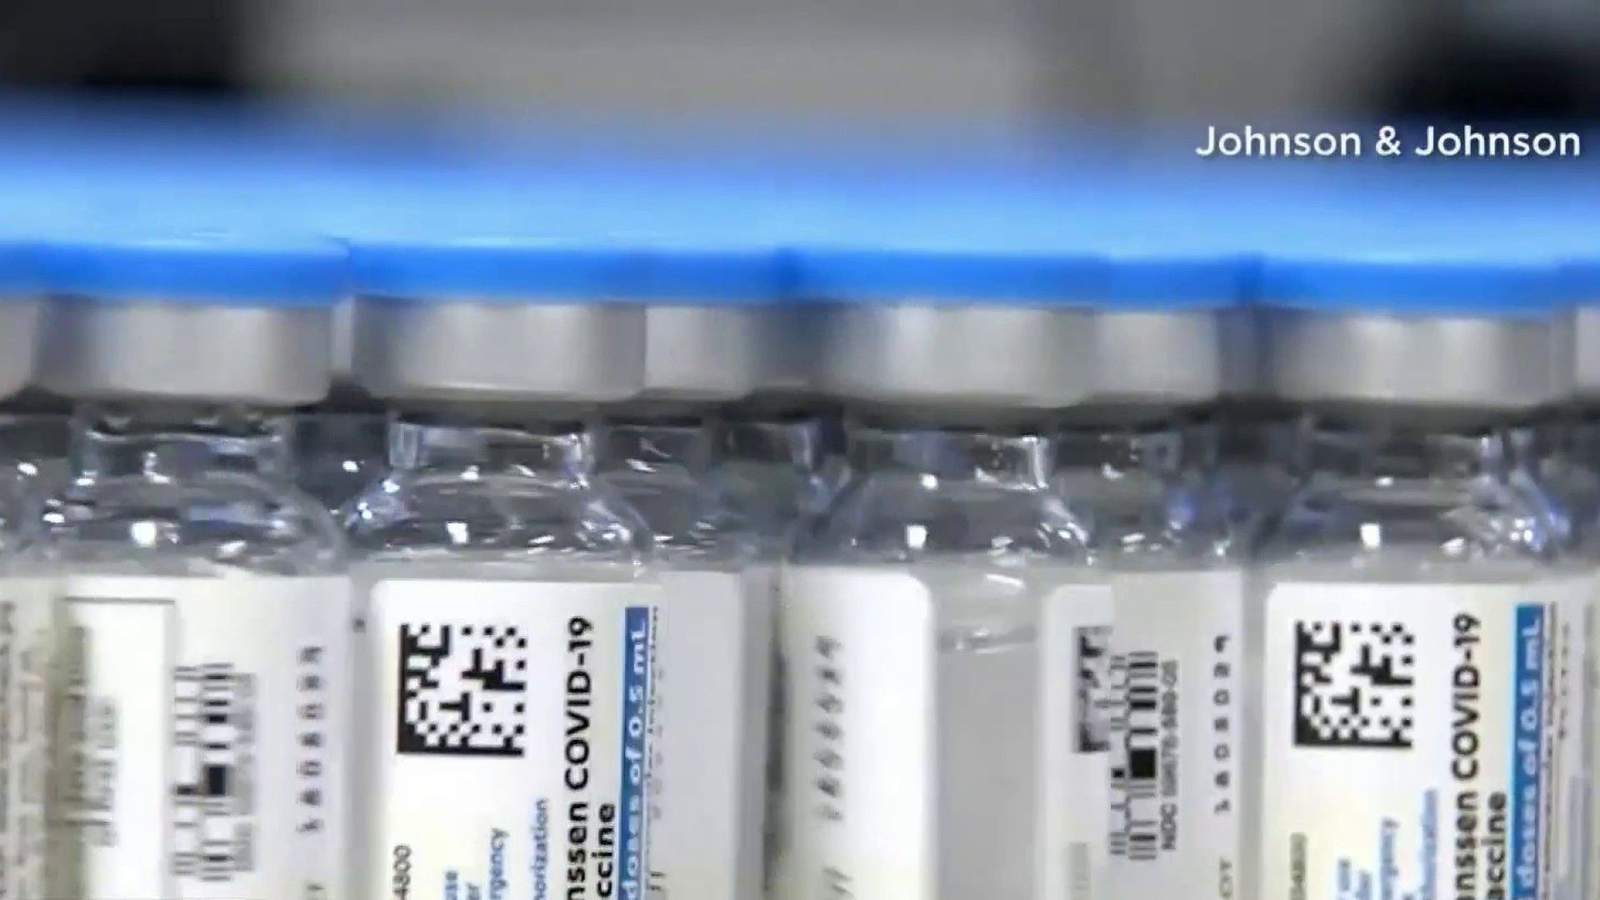 US health officials call for ‘pause’ in use of Johnson & Johnson vaccine over clot reports